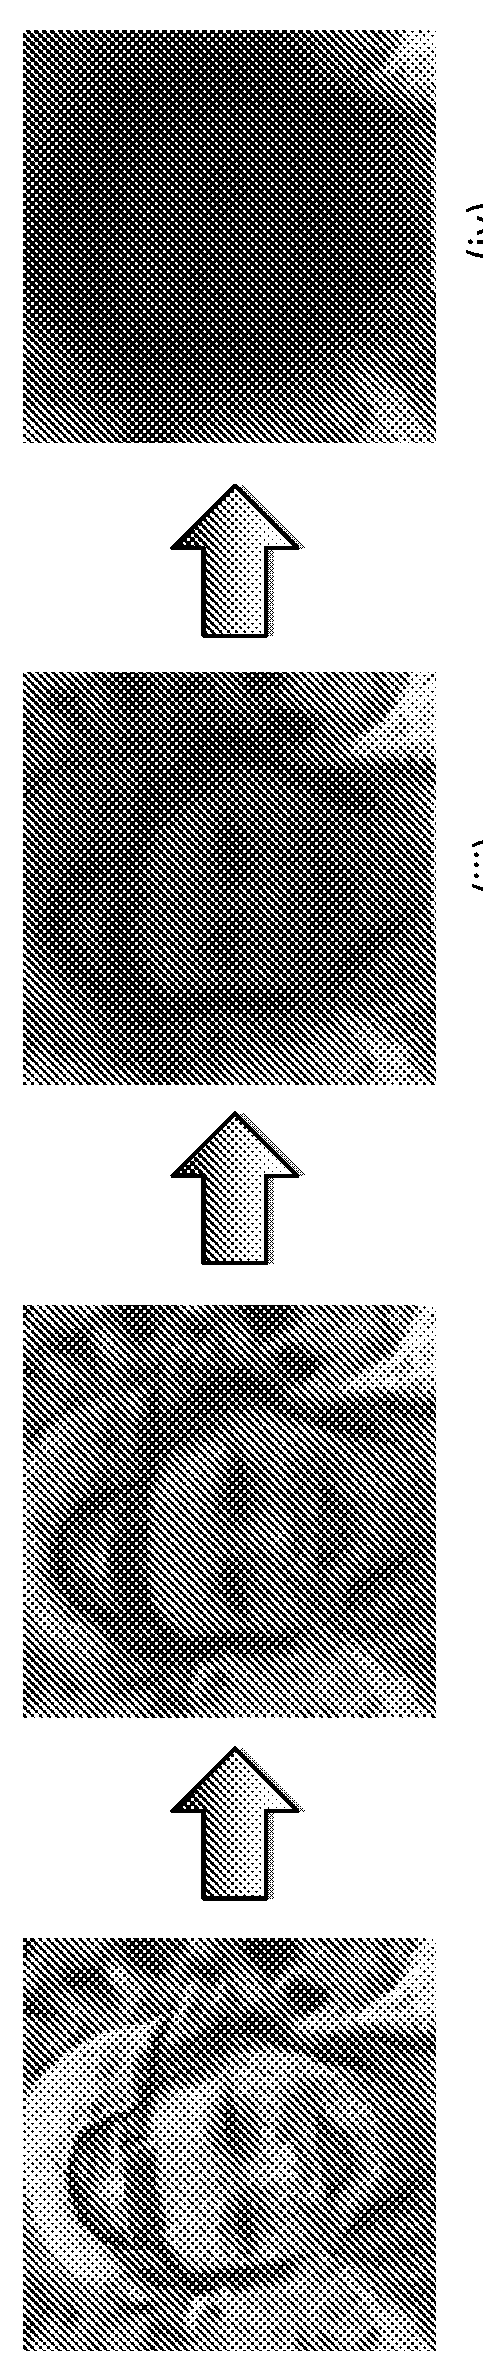 A system and method for displaying a video image